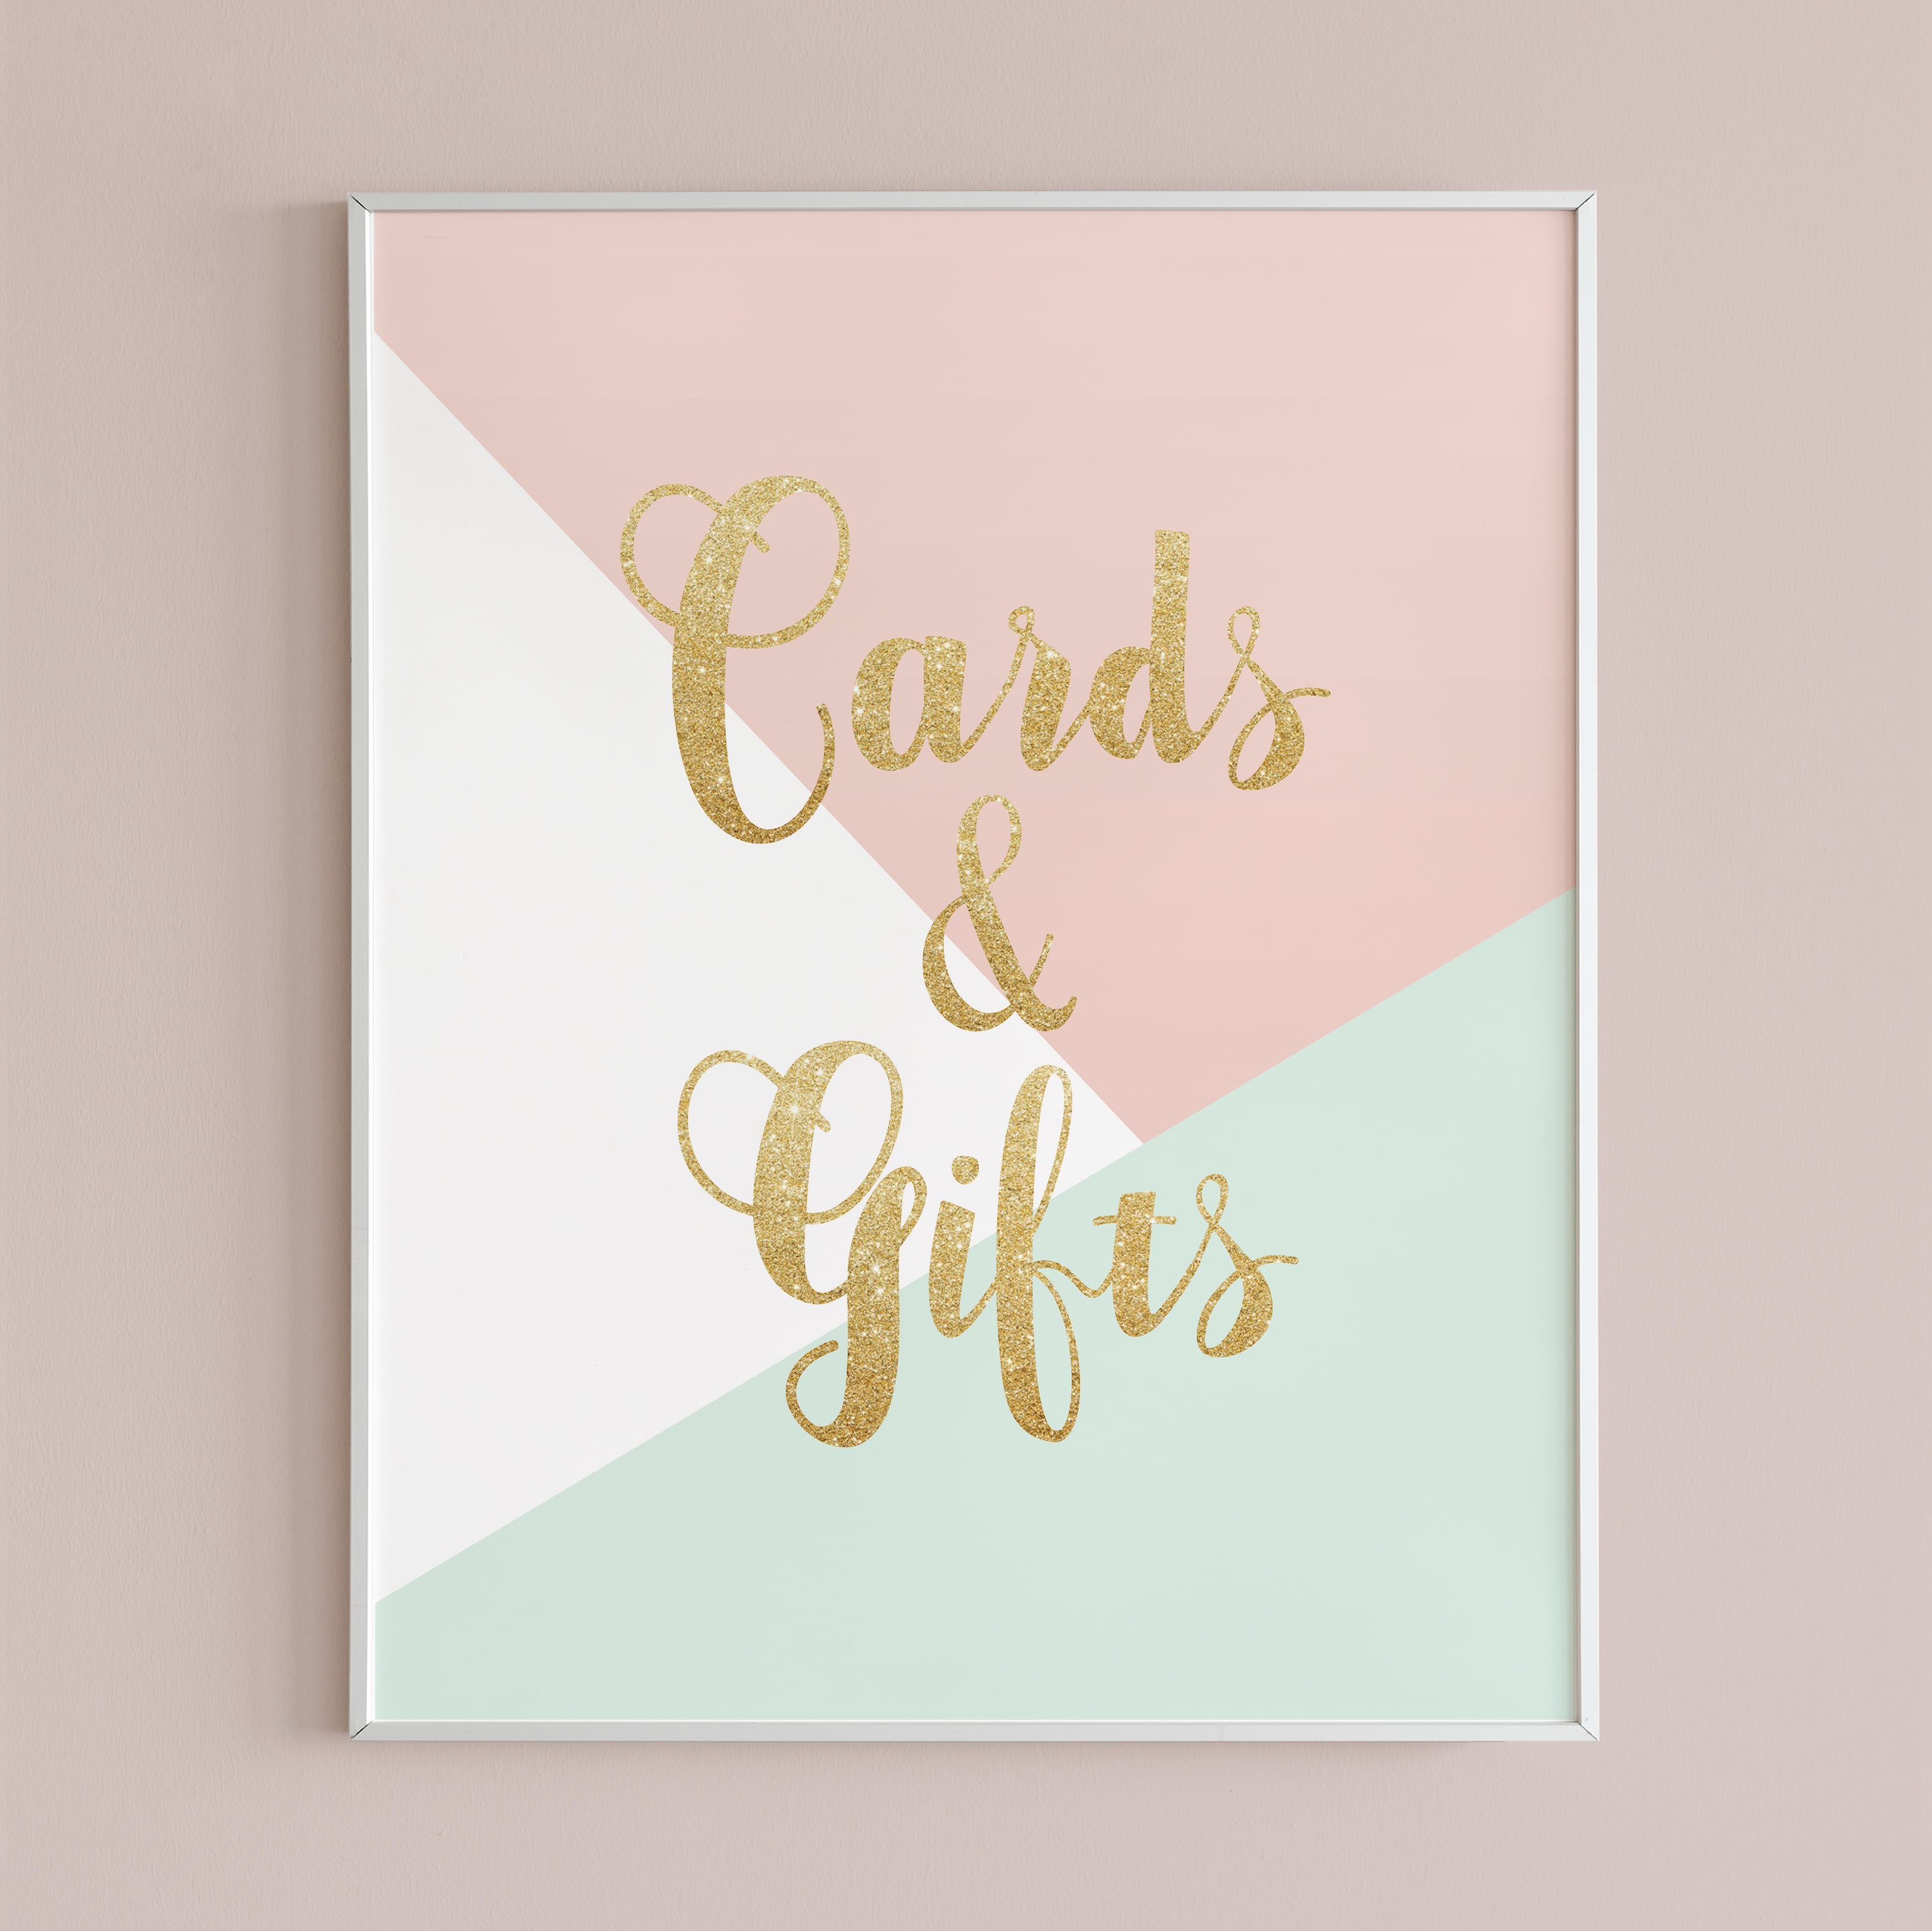 Pastel cards and gifts sign printable by LittleSizzle